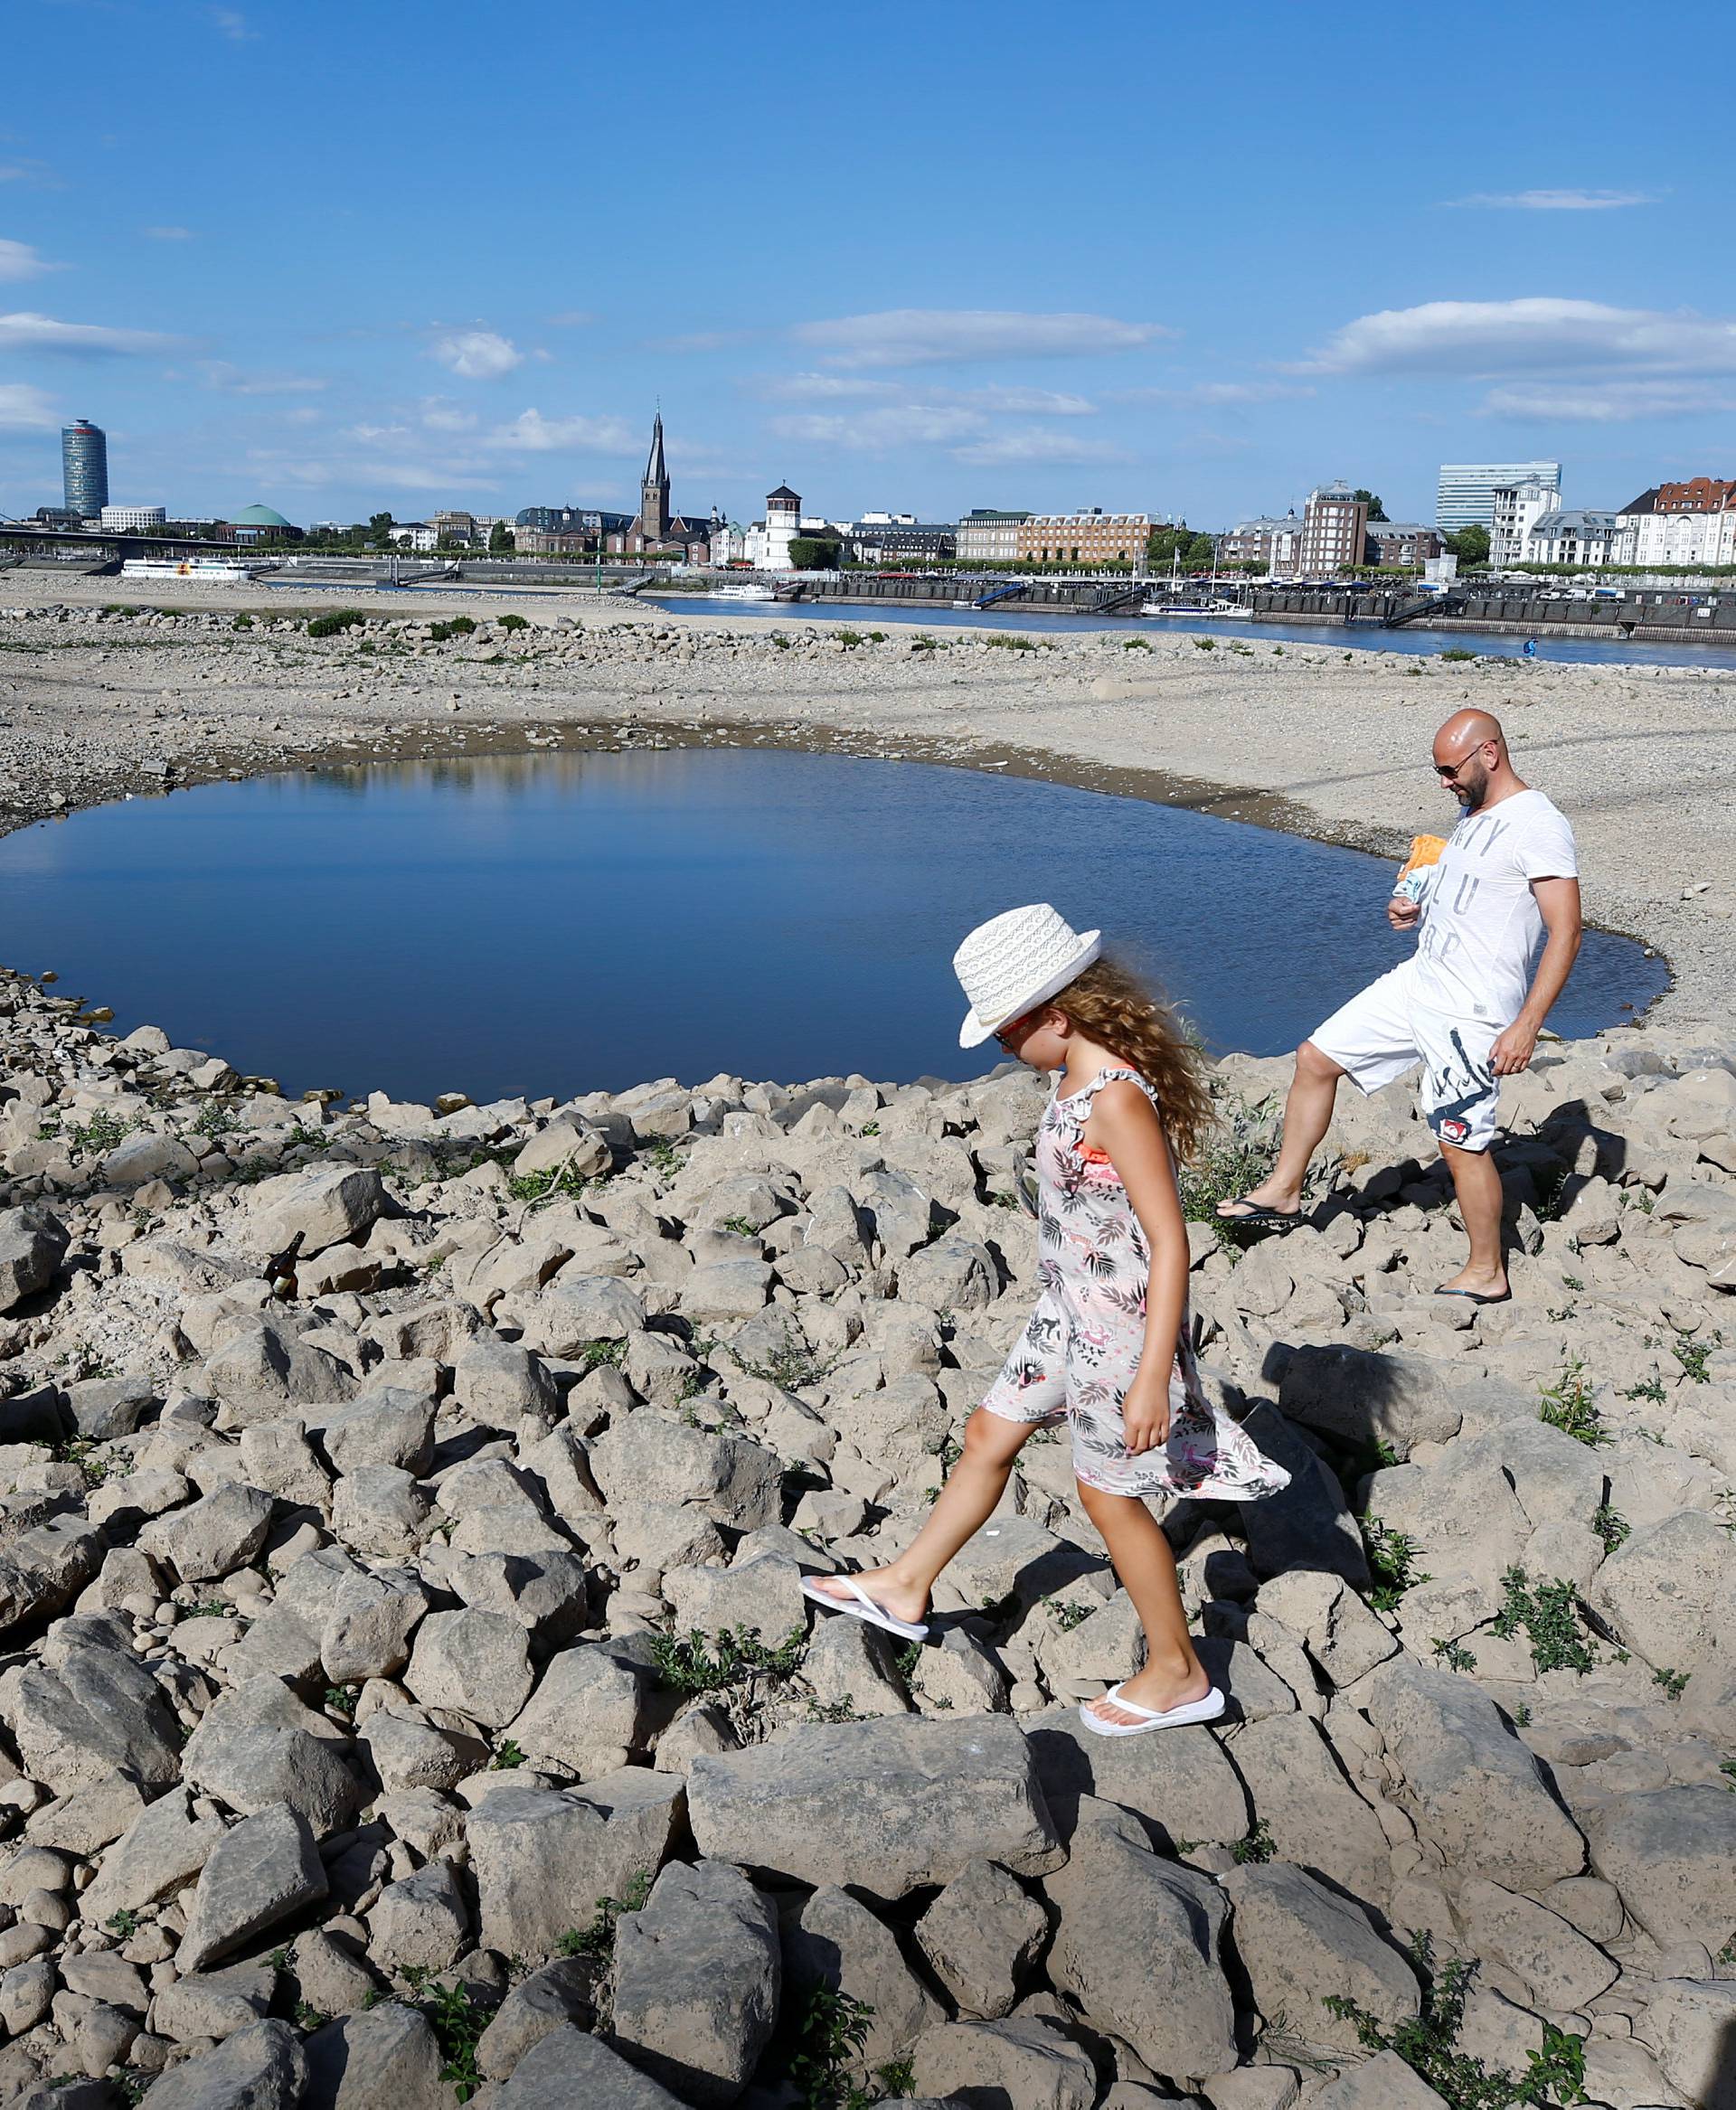 A family walks next to a puddle in the partially dried riverbed of Rhine, in front of the skyline of Dusseldorf